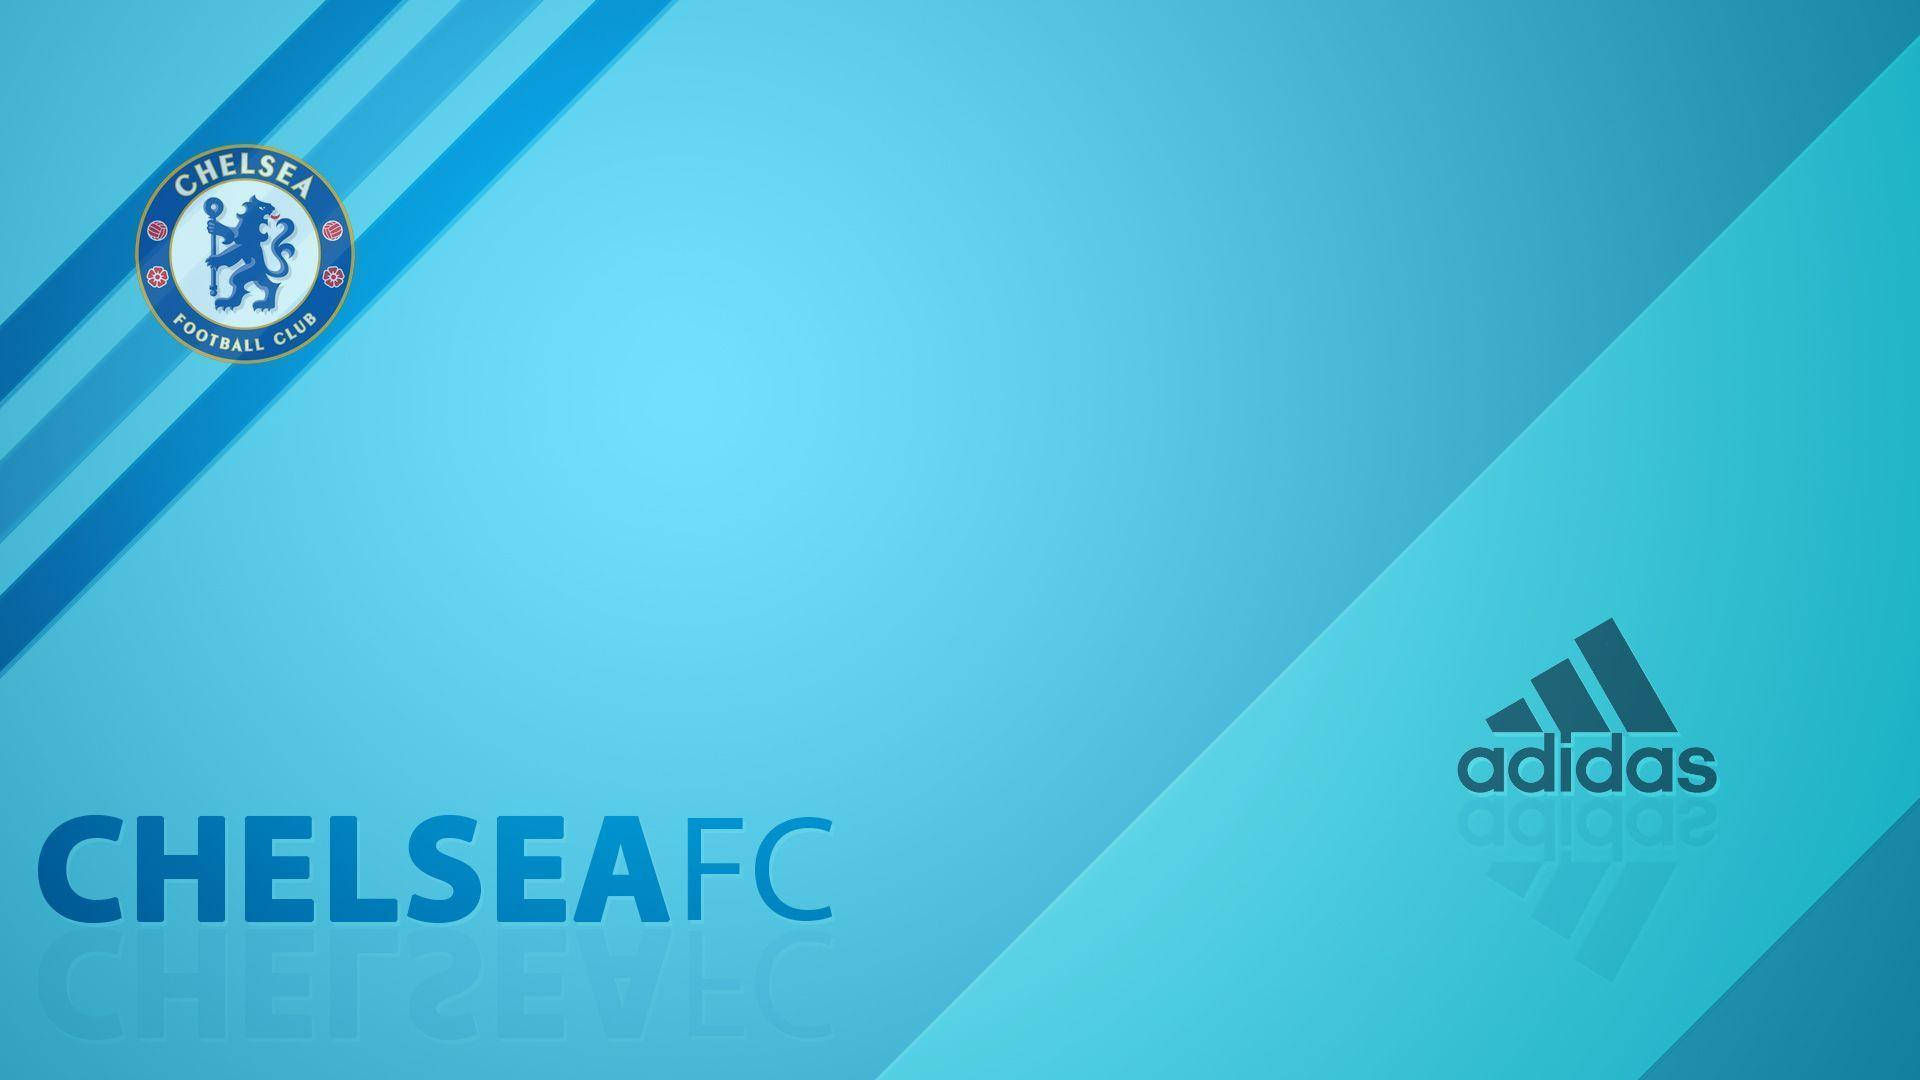 Chelsea Fc And Adidas Logos Background